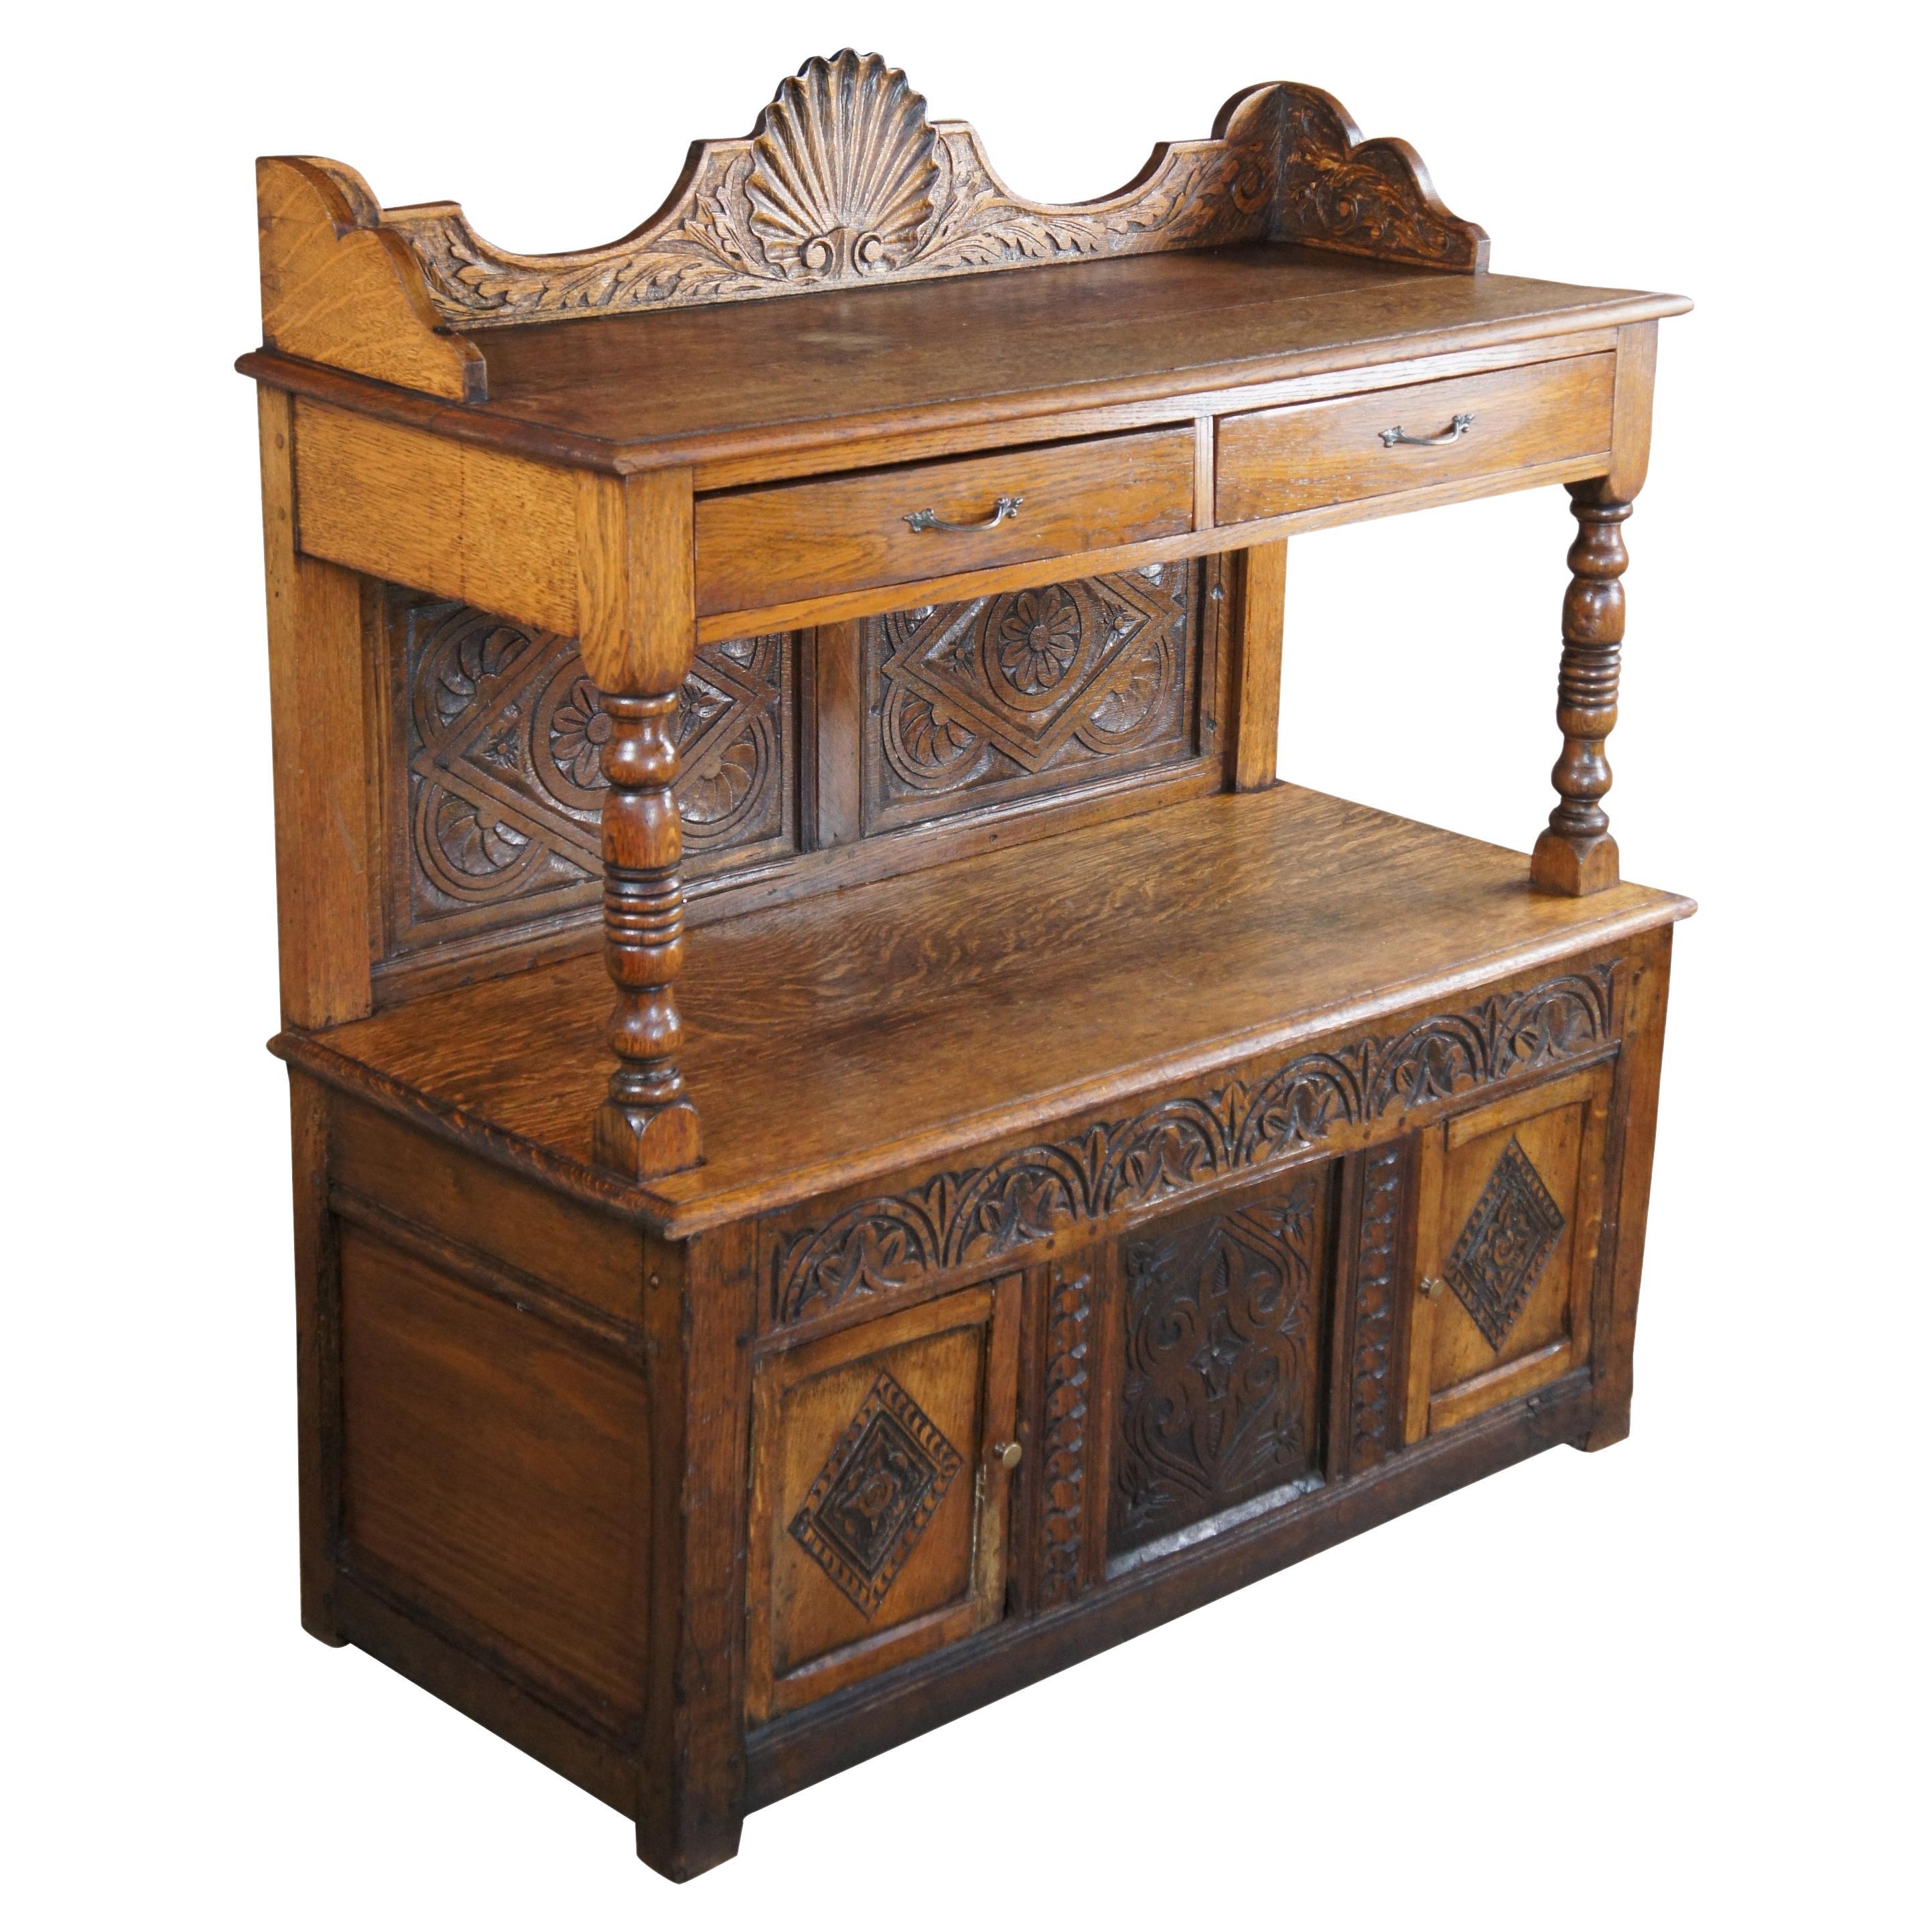 A beautiful English Charles II era sideboard or server, circa 1660s. Reminiscent of the Jacobean era Court Cupboard. Made from quartersawn oak with intricately carved details. Features a rectangular form with a large upper serving area over a frieze